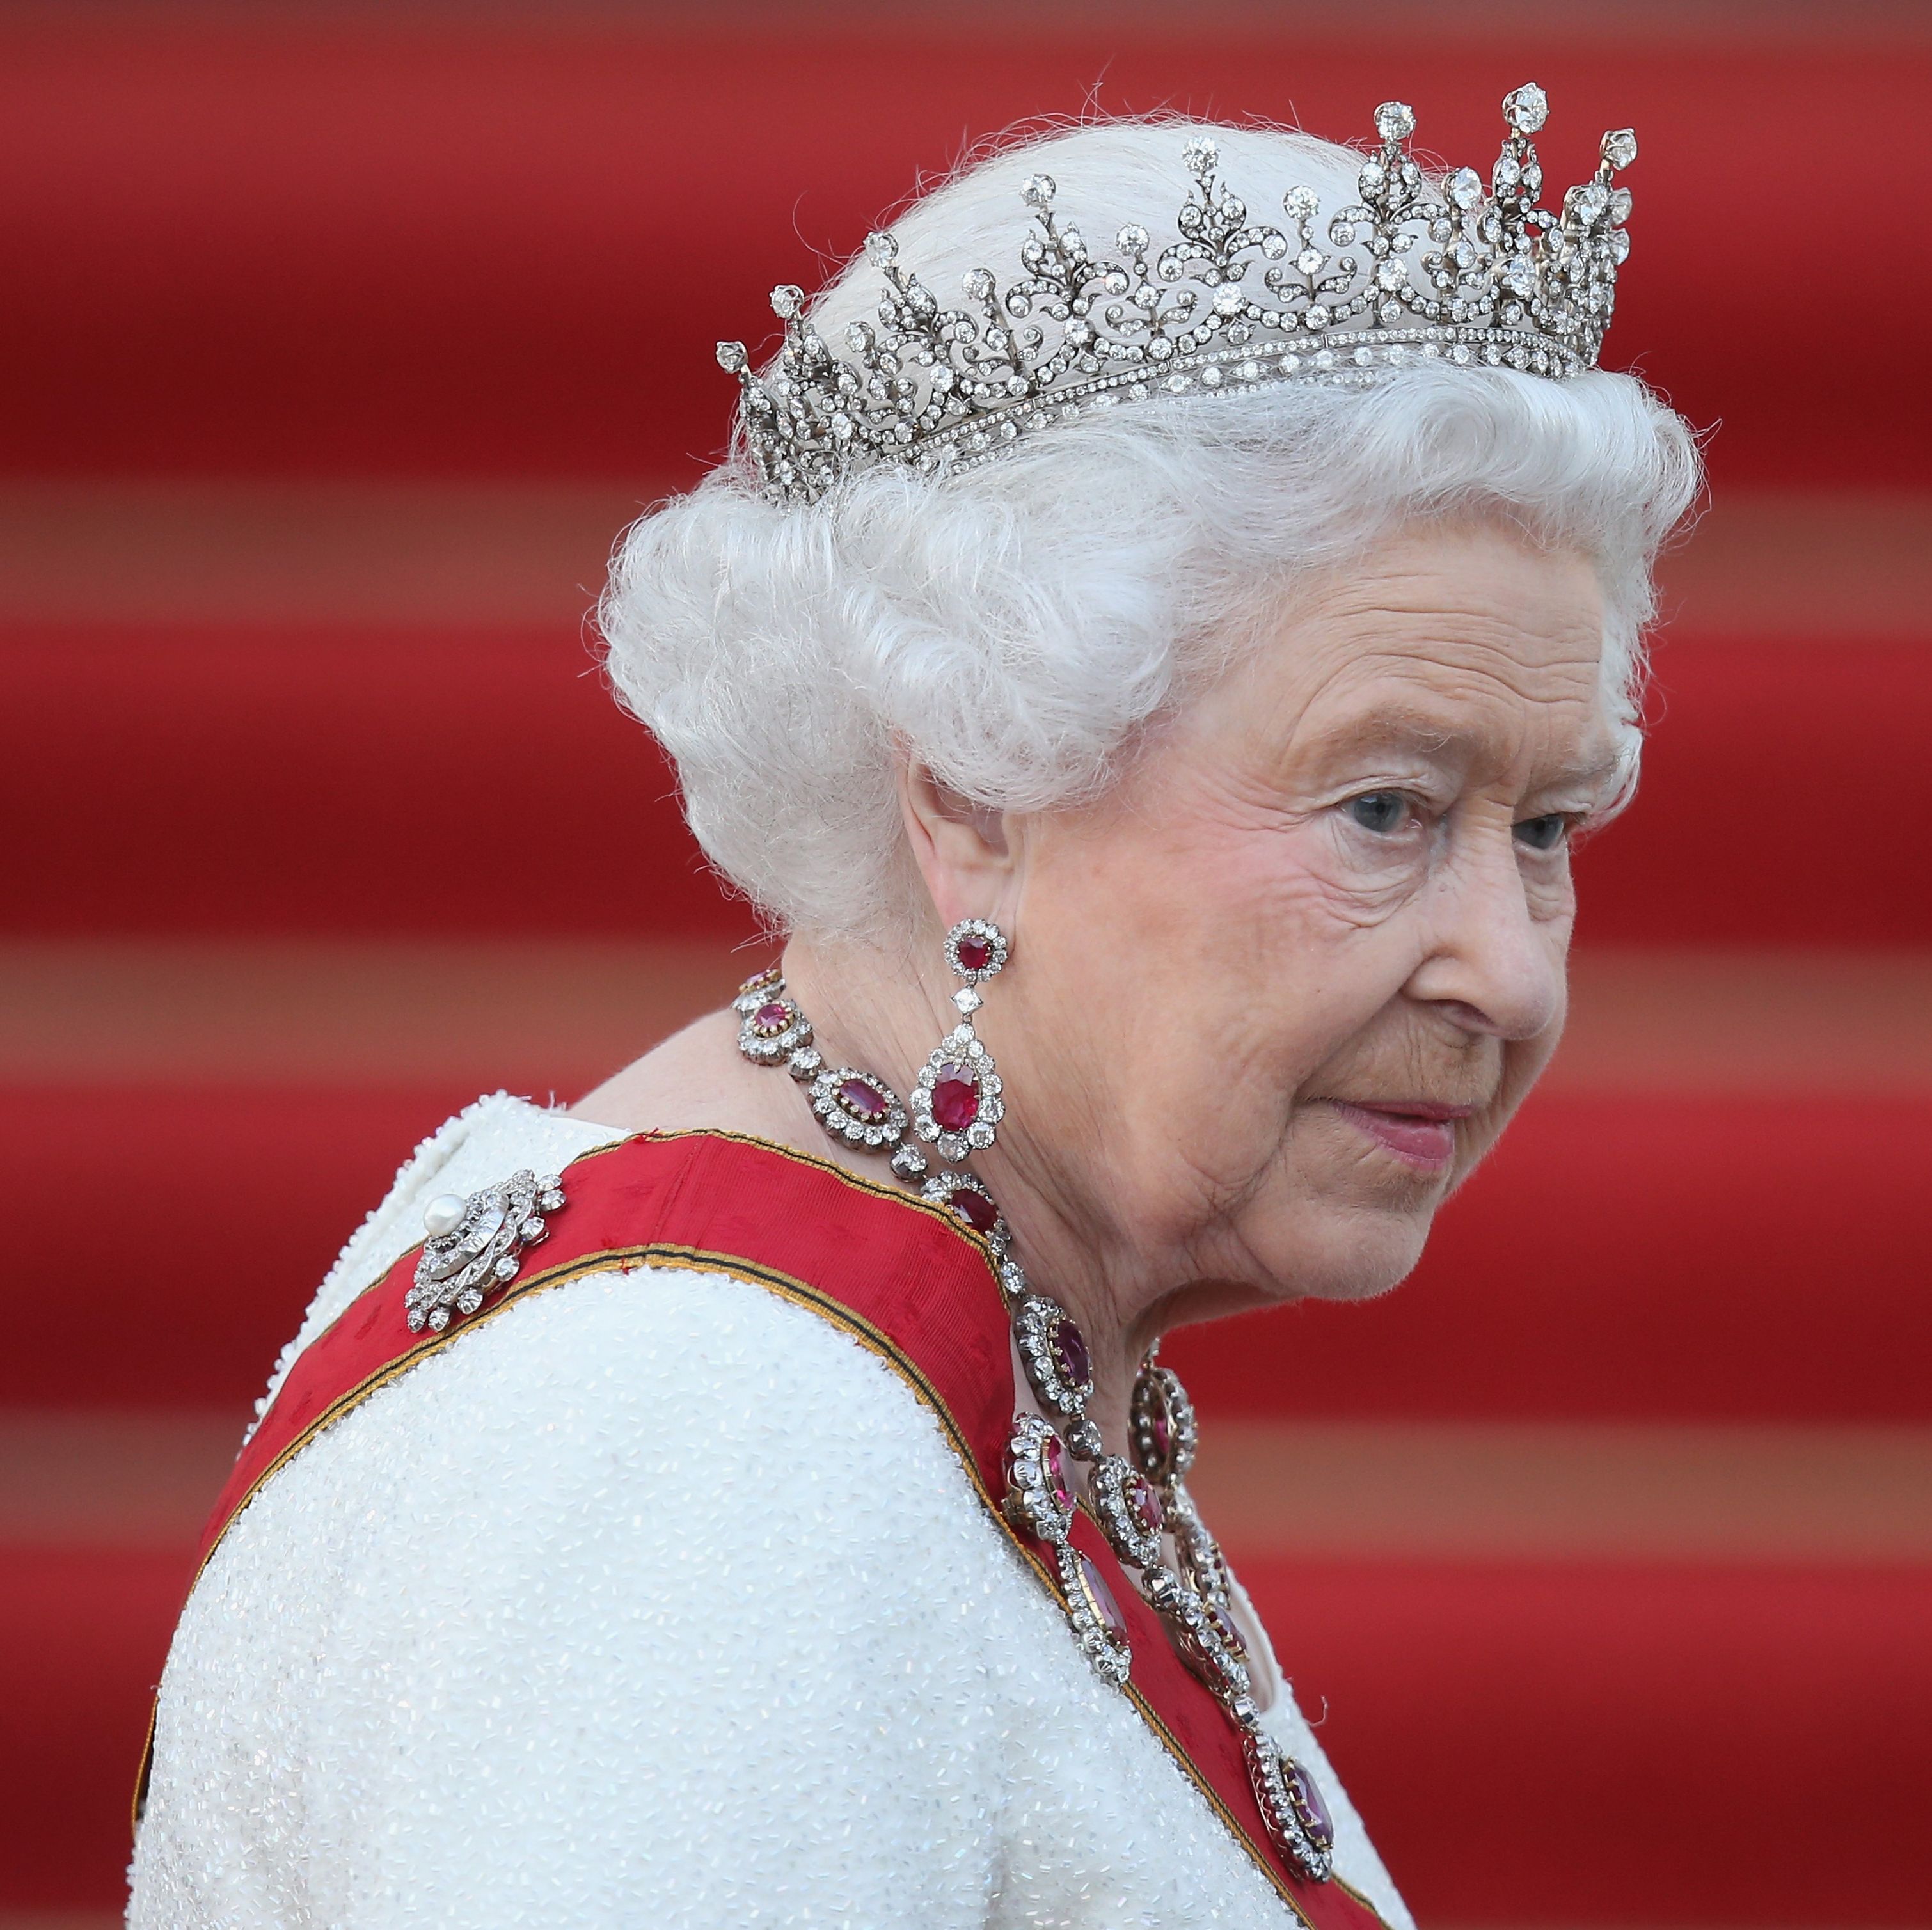 The Queen's Official Job Description Has Been Rewritten for the First Time in Over 10 Years